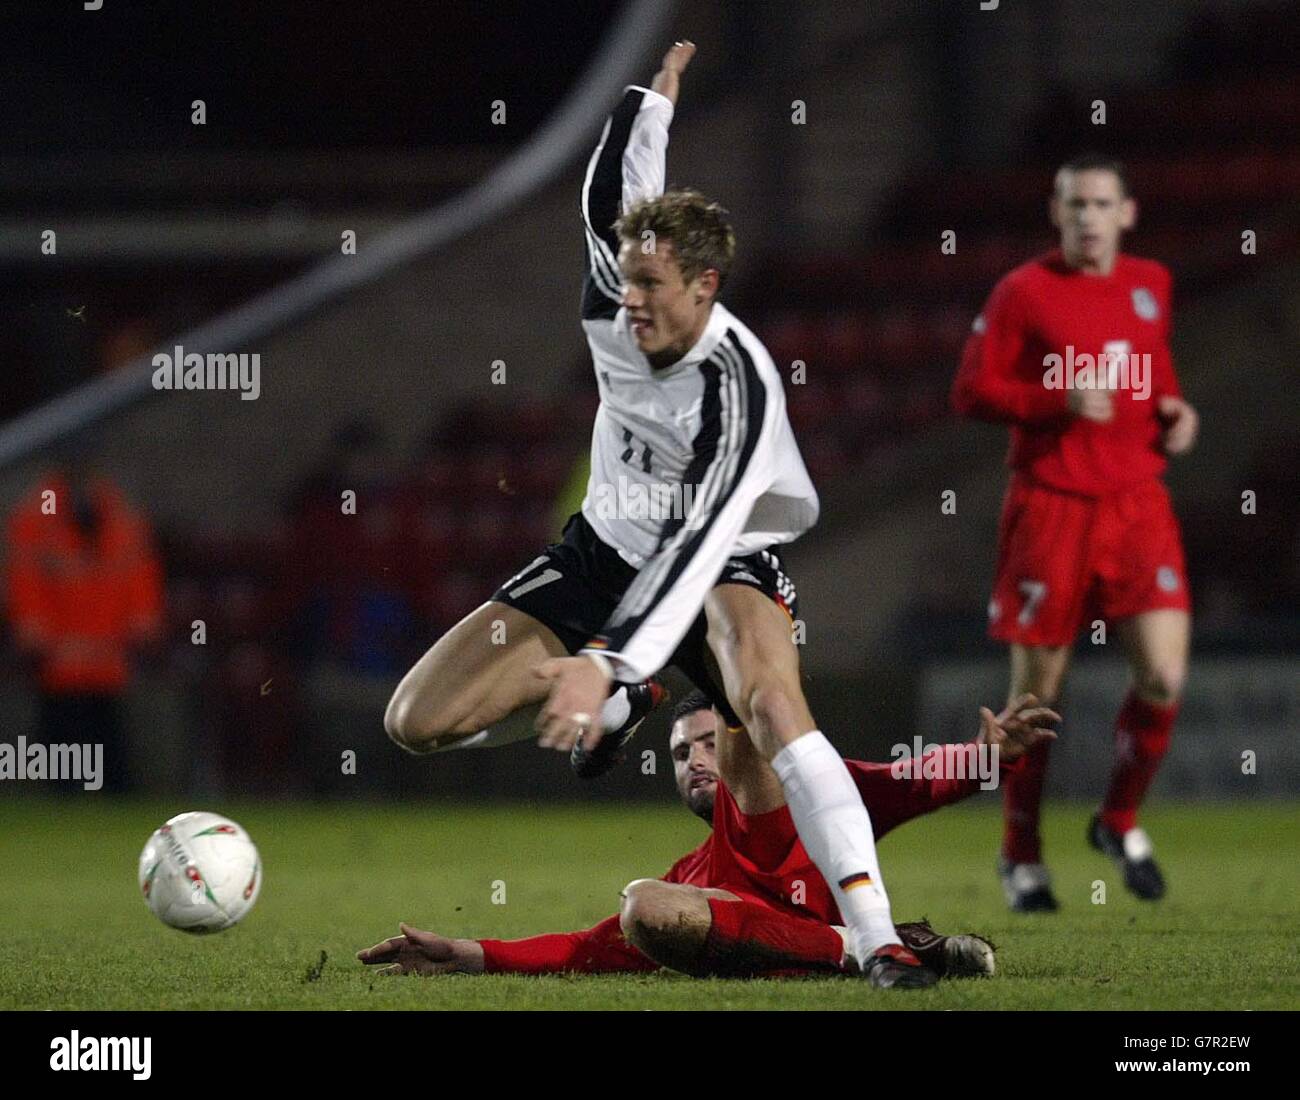 Soccer - UEFA Under 21 Championship - Qualifying Round - Wales v Germany - Racecourse Ground. Wales' Craig Morgan and Germany's Marcell Jansen battle for the ball Stock Photo